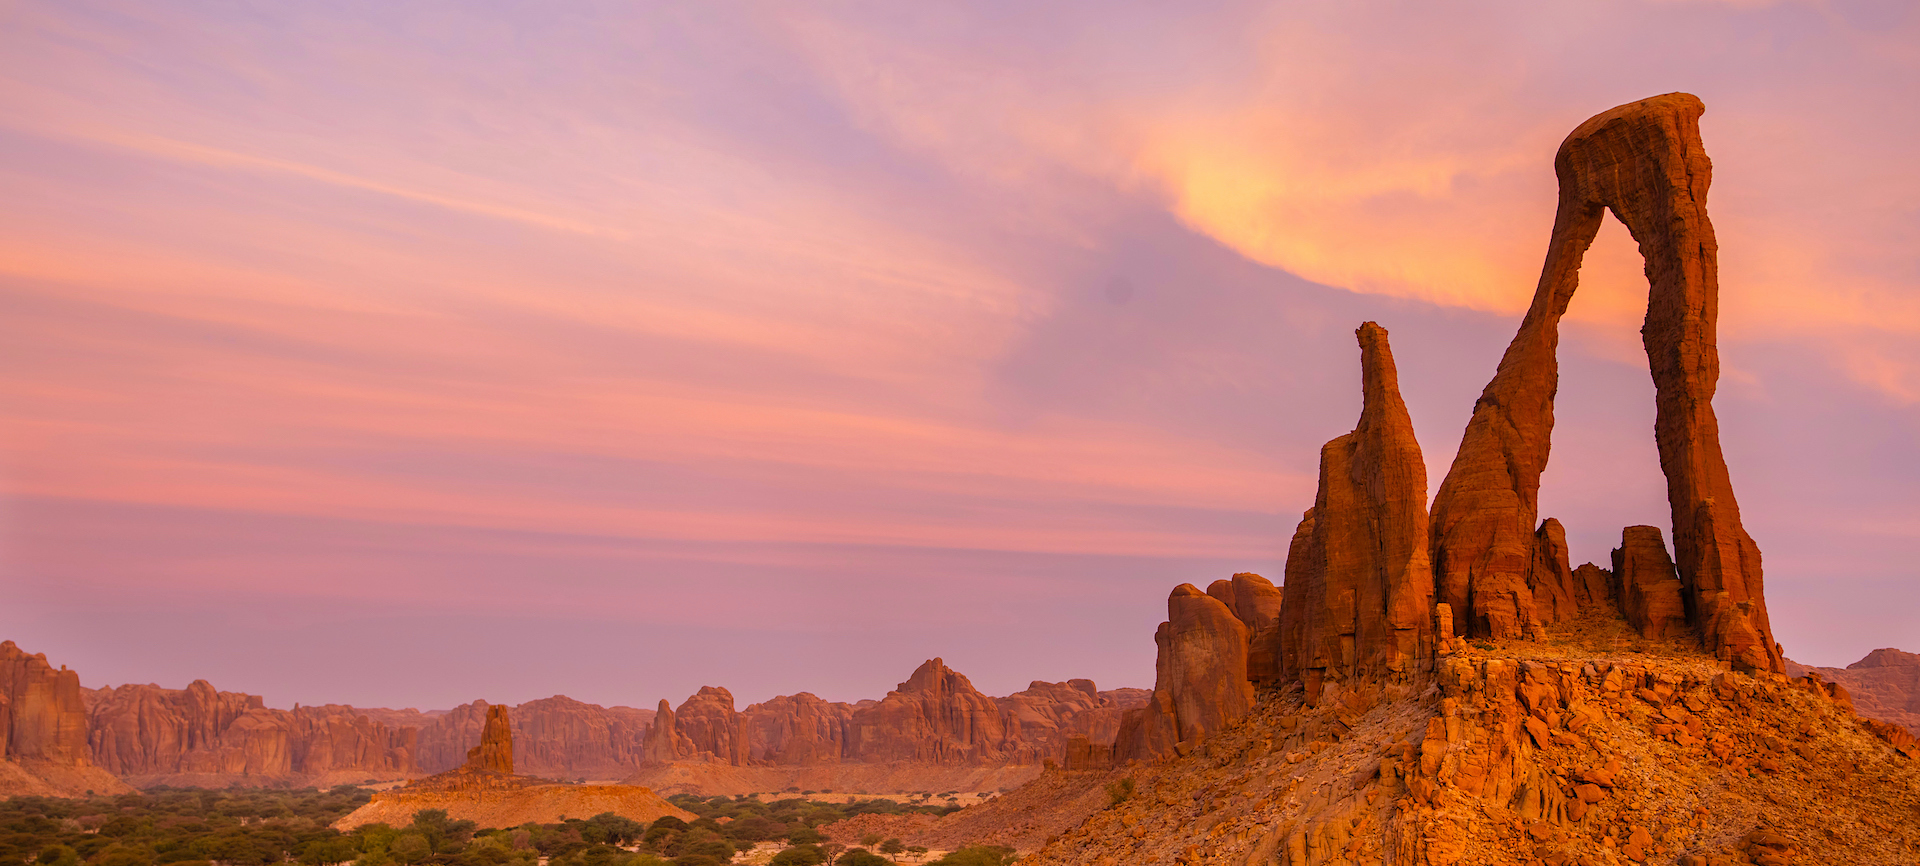 Rock arch at sunset in Ennedi